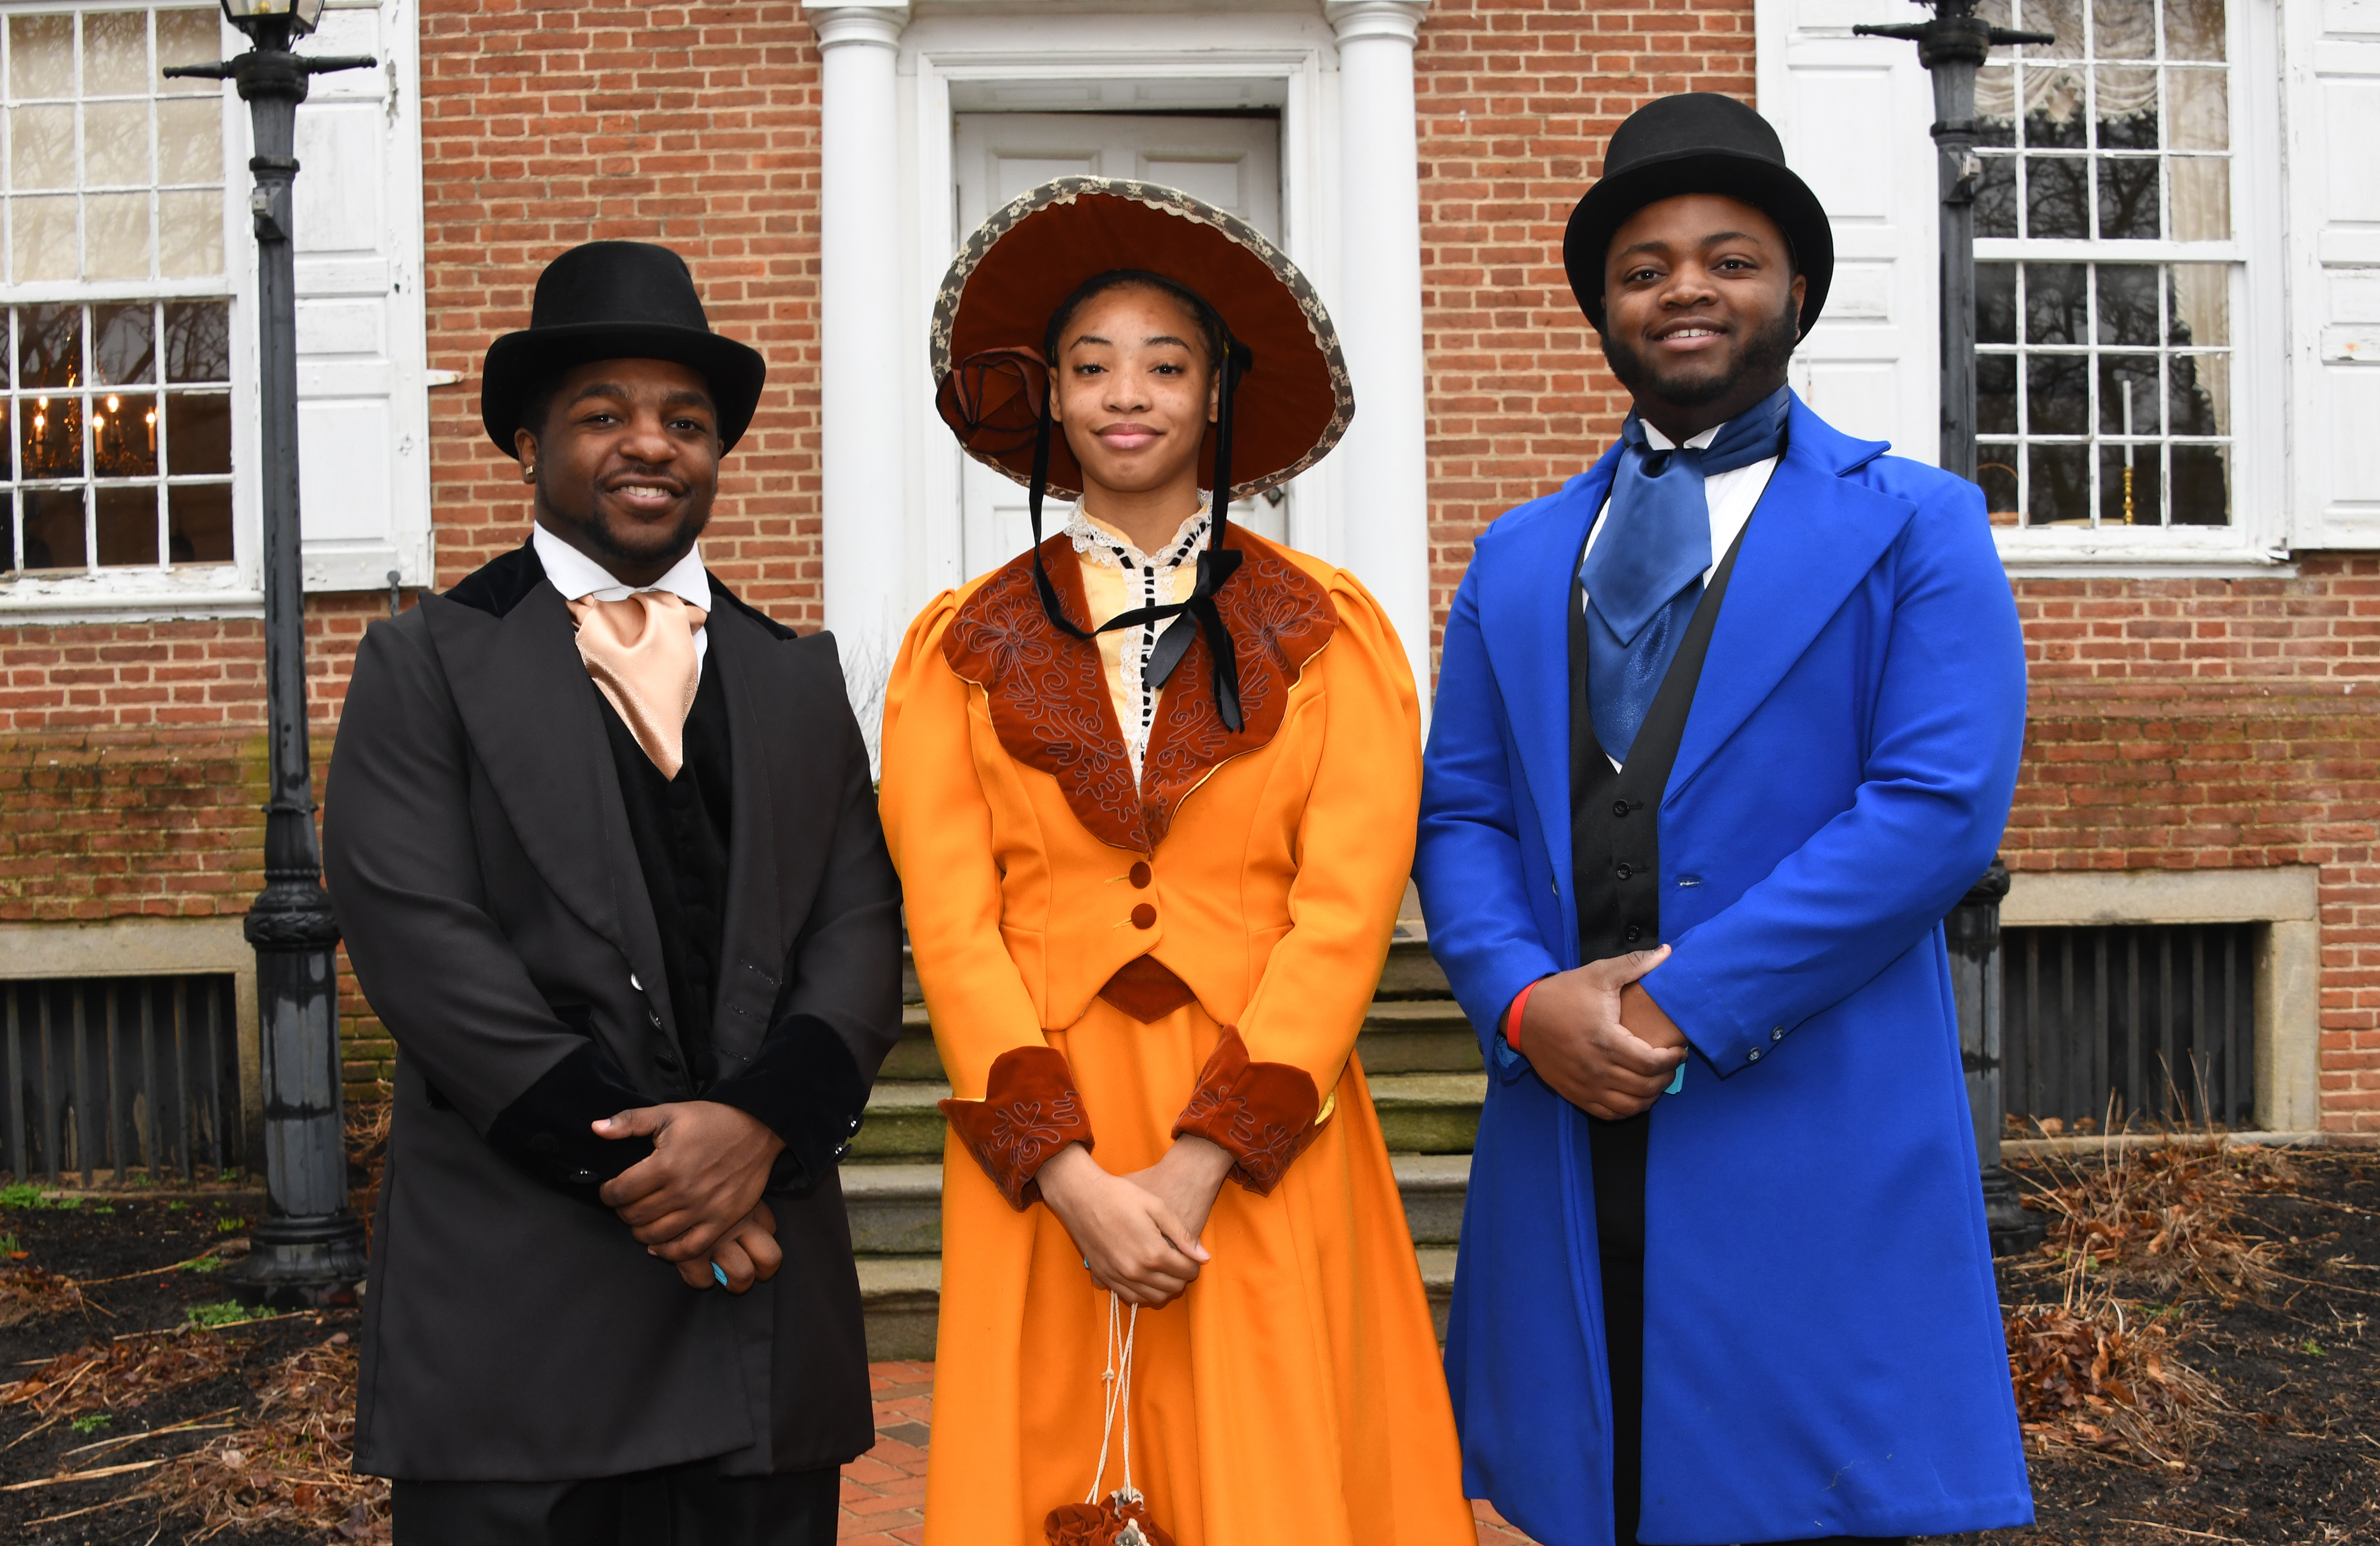 Del State students Tyler Brown, Bianca Laconte and Anthony McIver donned late-1800 outfits as part of the Loockerman Hall Open House on Founders' Day